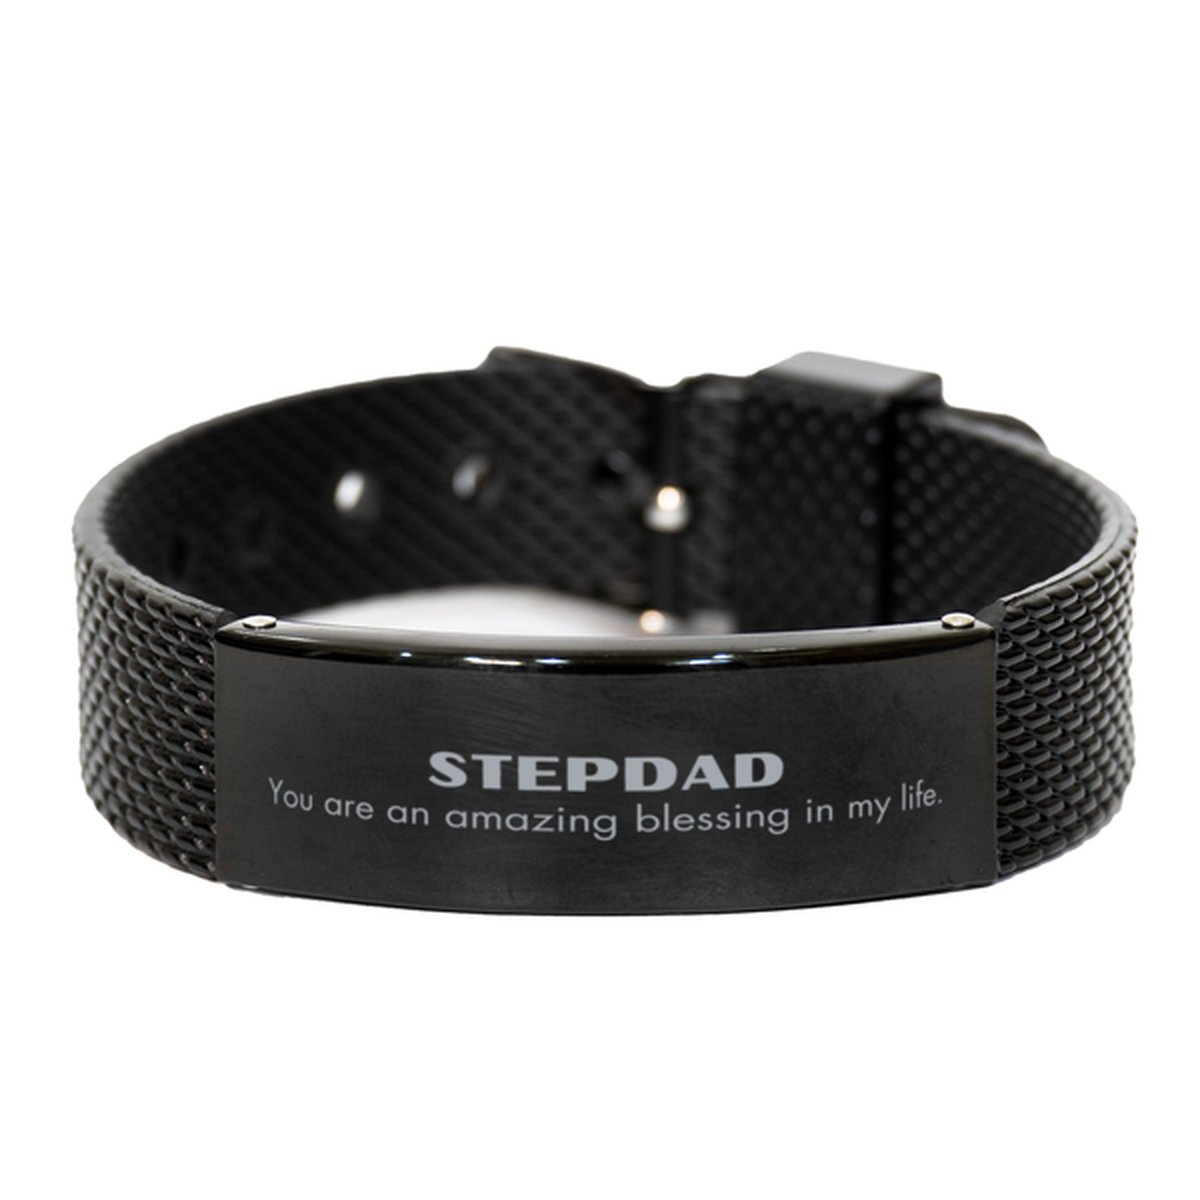 Stepdad Black Shark Mesh Bracelet, You are an amazing blessing in my life, Thank You Gifts For Stepdad, Inspirational Birthday Christmas Unique Gifts For Stepdad